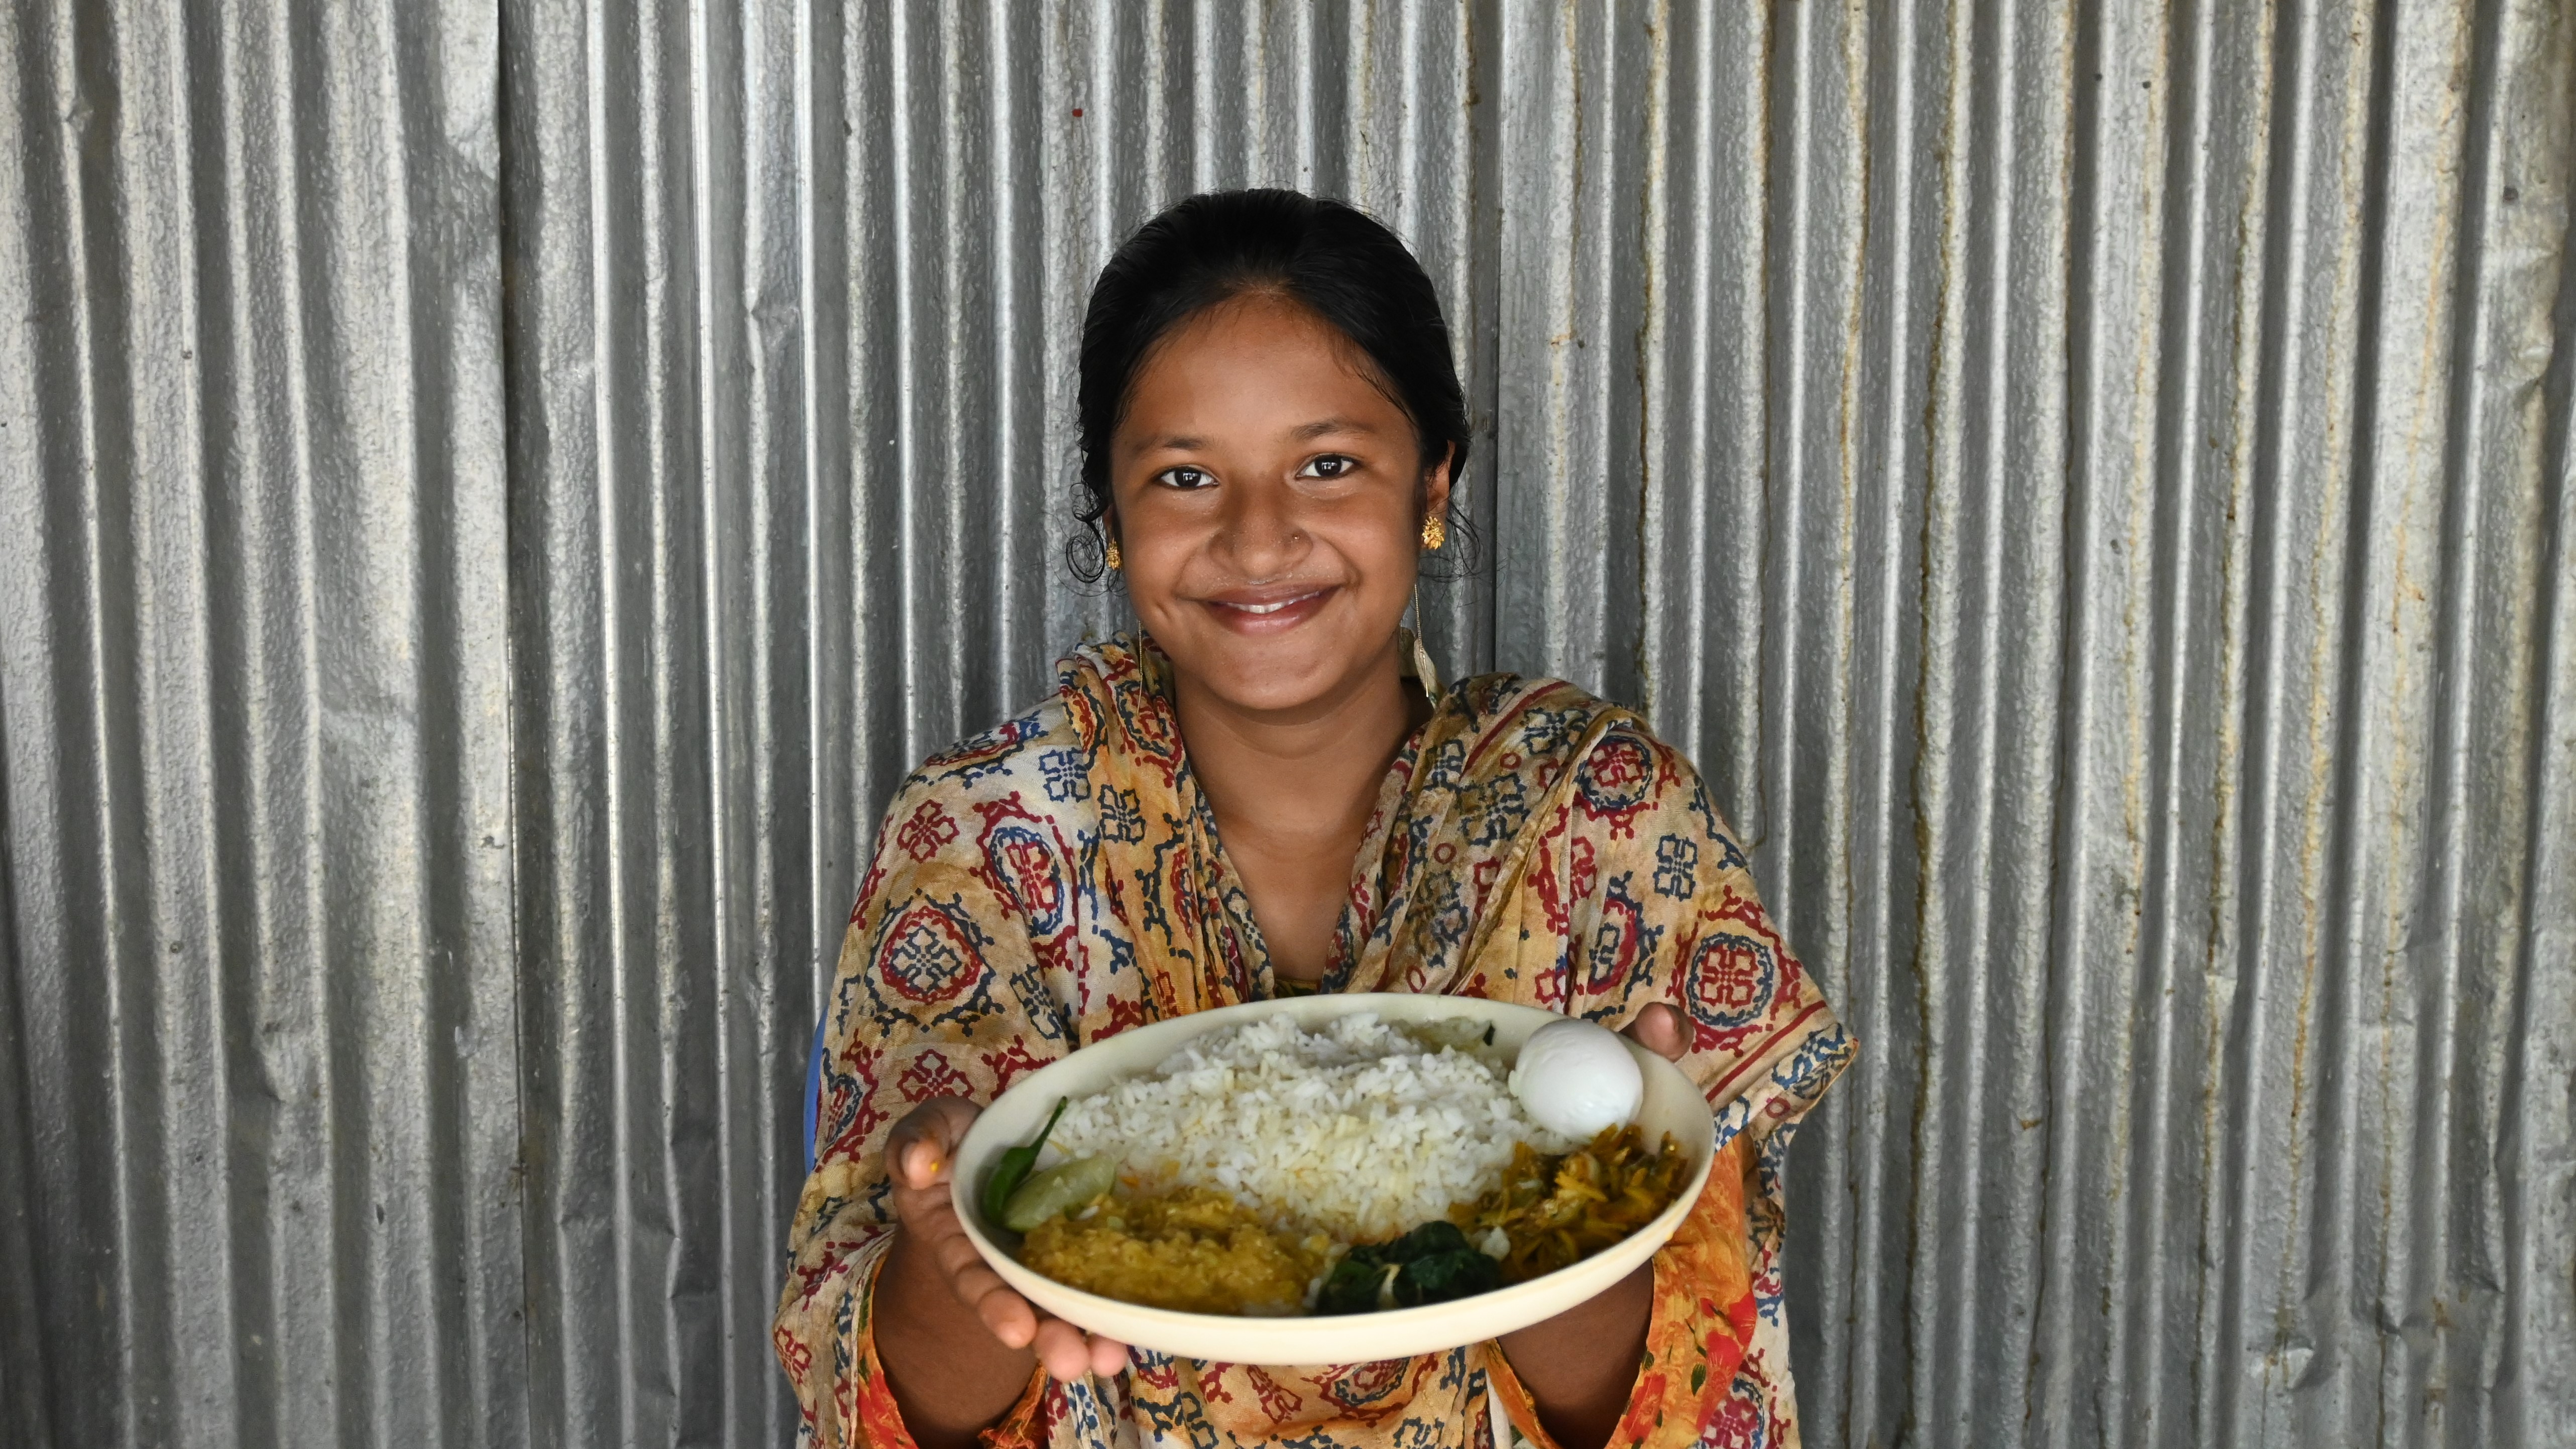 To the best of her abilities, she maintains balanced diets required during adolescence e.g. eating eggs, fish, and lentils that provide protein, vegetables for required vitamins, and rice for energy to keep herself active.  She also eats seasonal fruits like guava, banana, and other available fruits for complementary vitamins and minerals to stay healthy.  